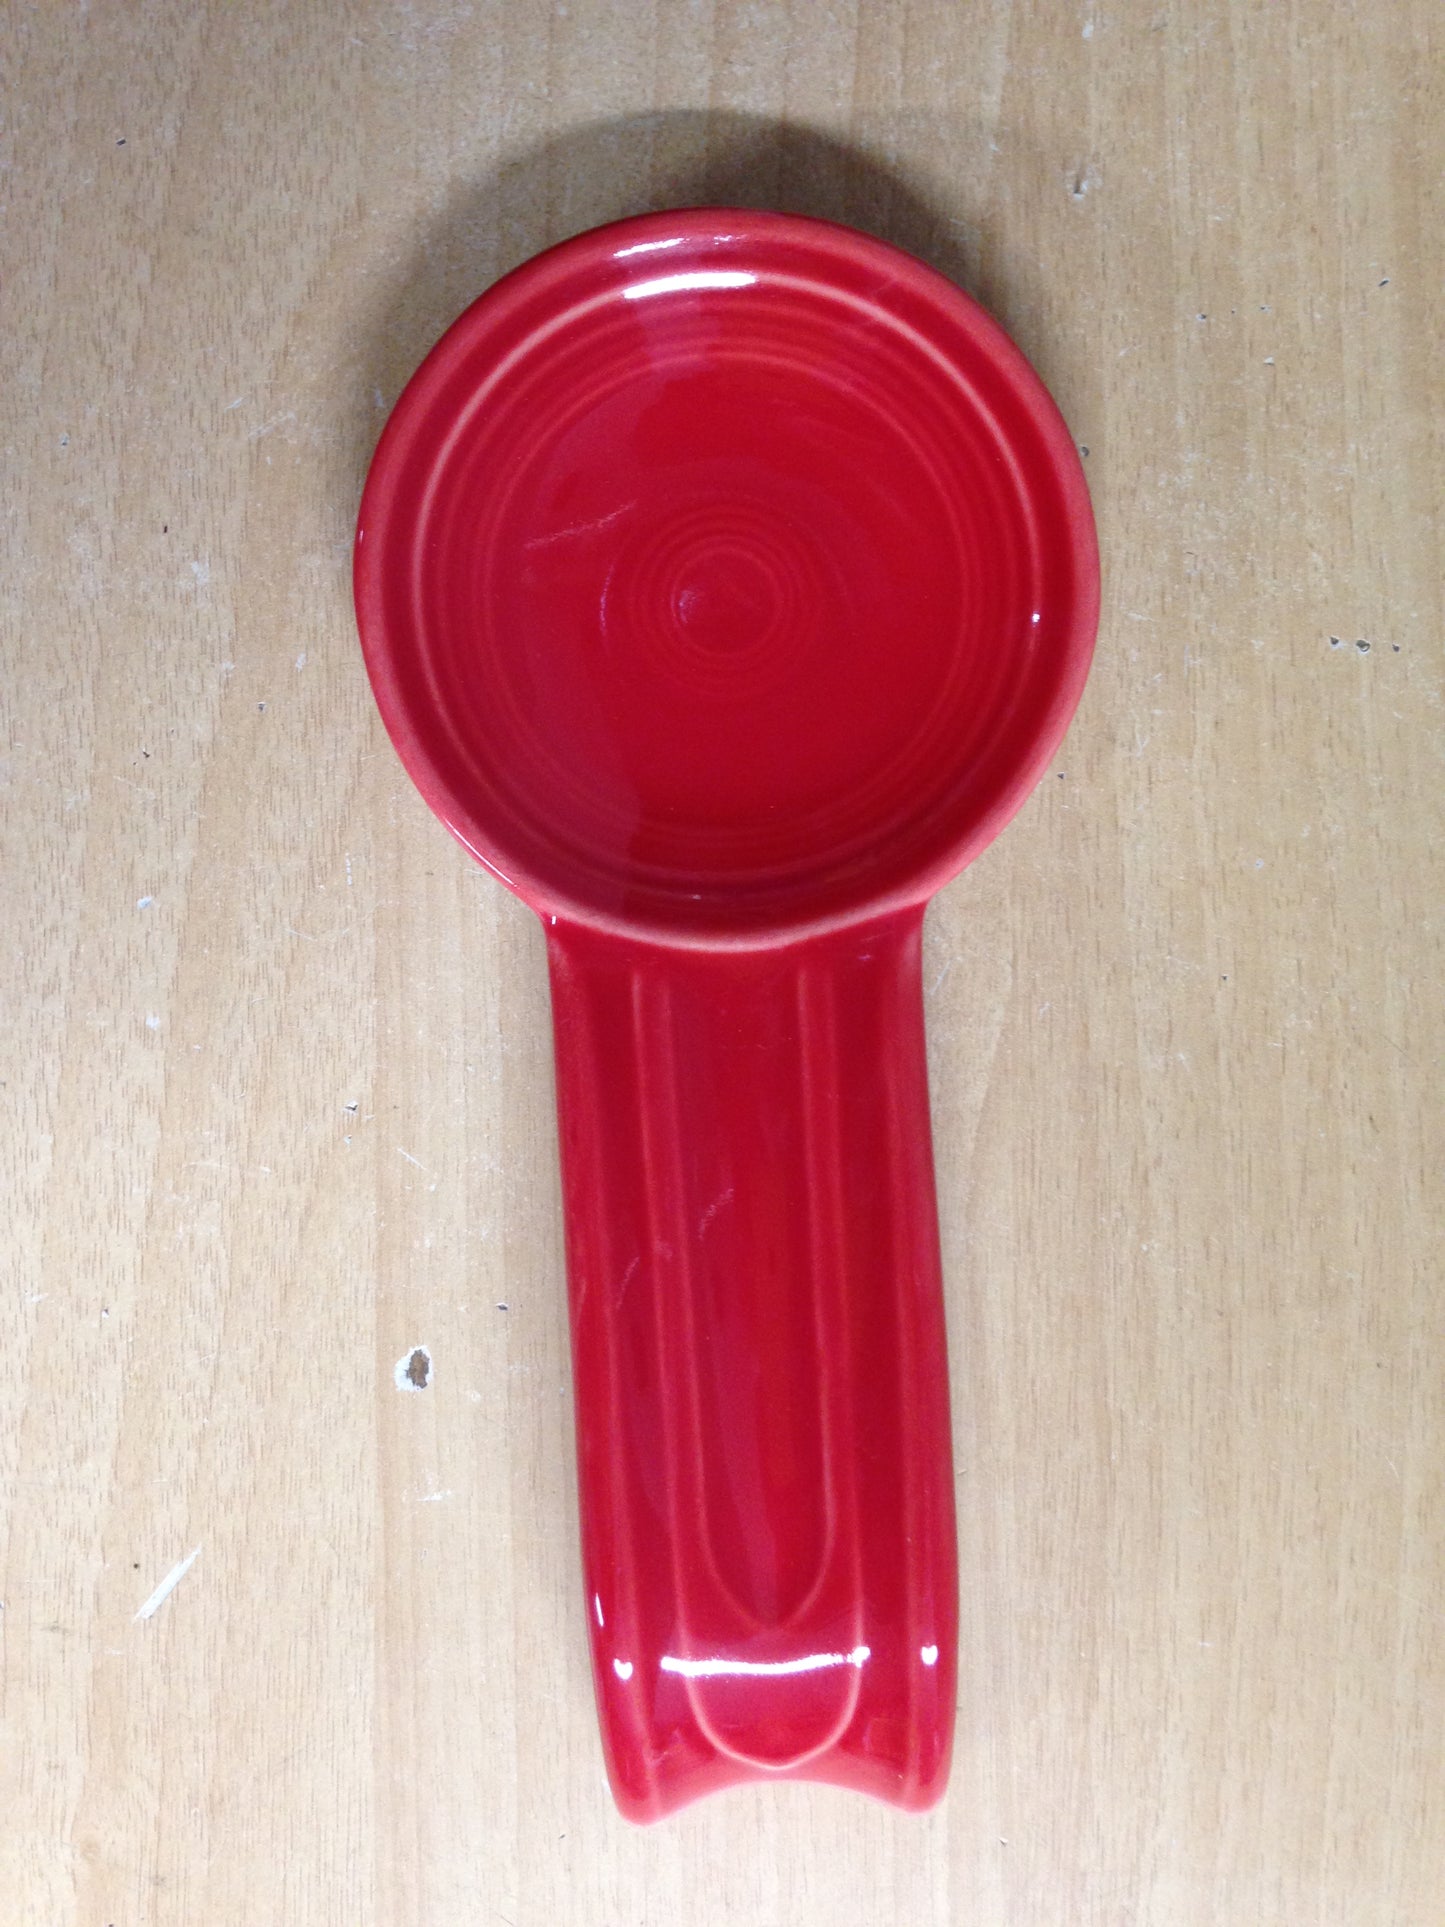 Fiesta Ware Red Spoon Rest As New Outstanding